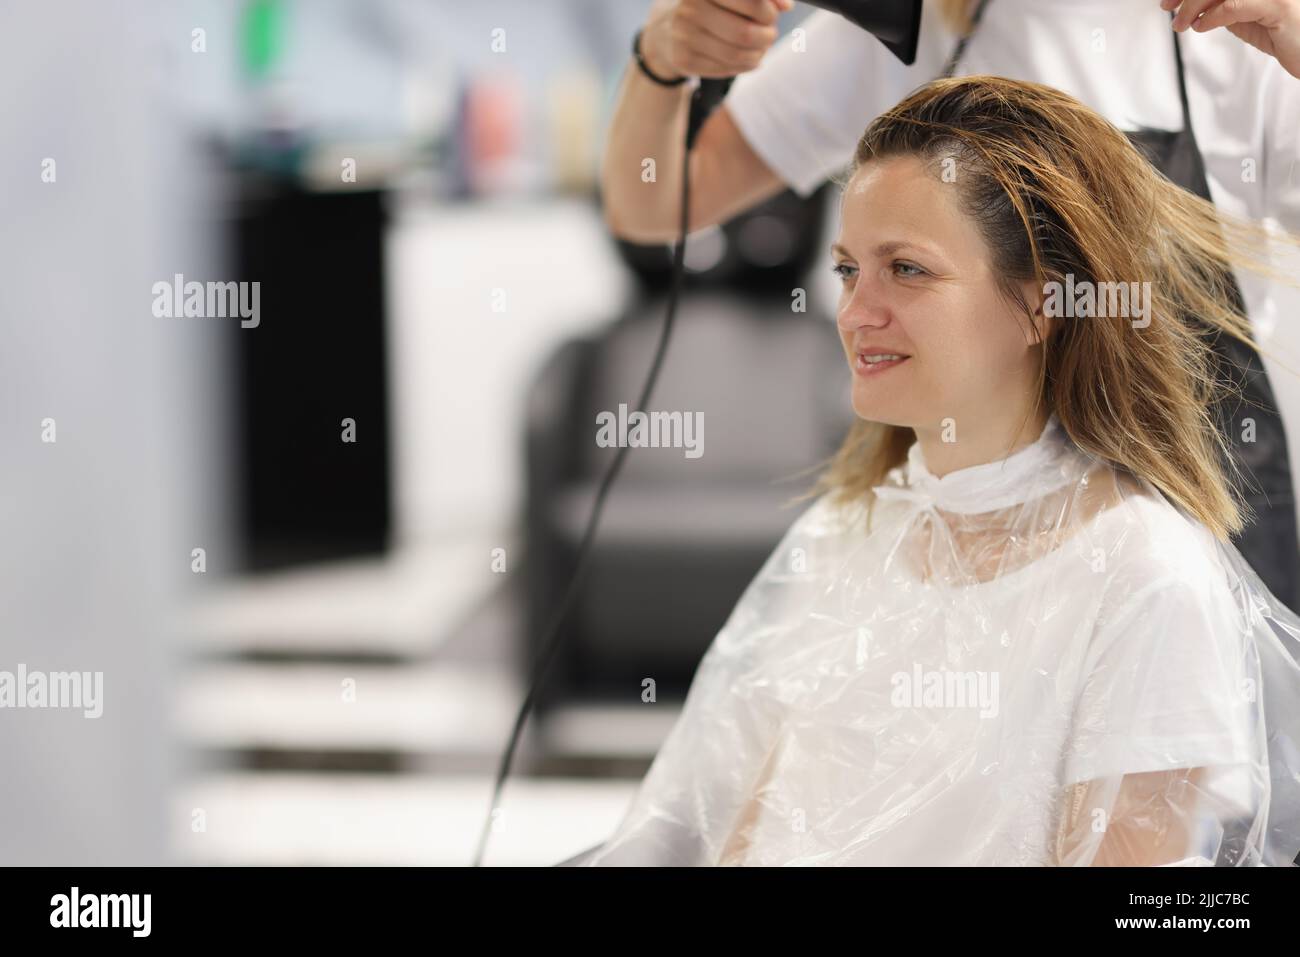 Hair styling process in beauty salon with hair dryer Stock Photo